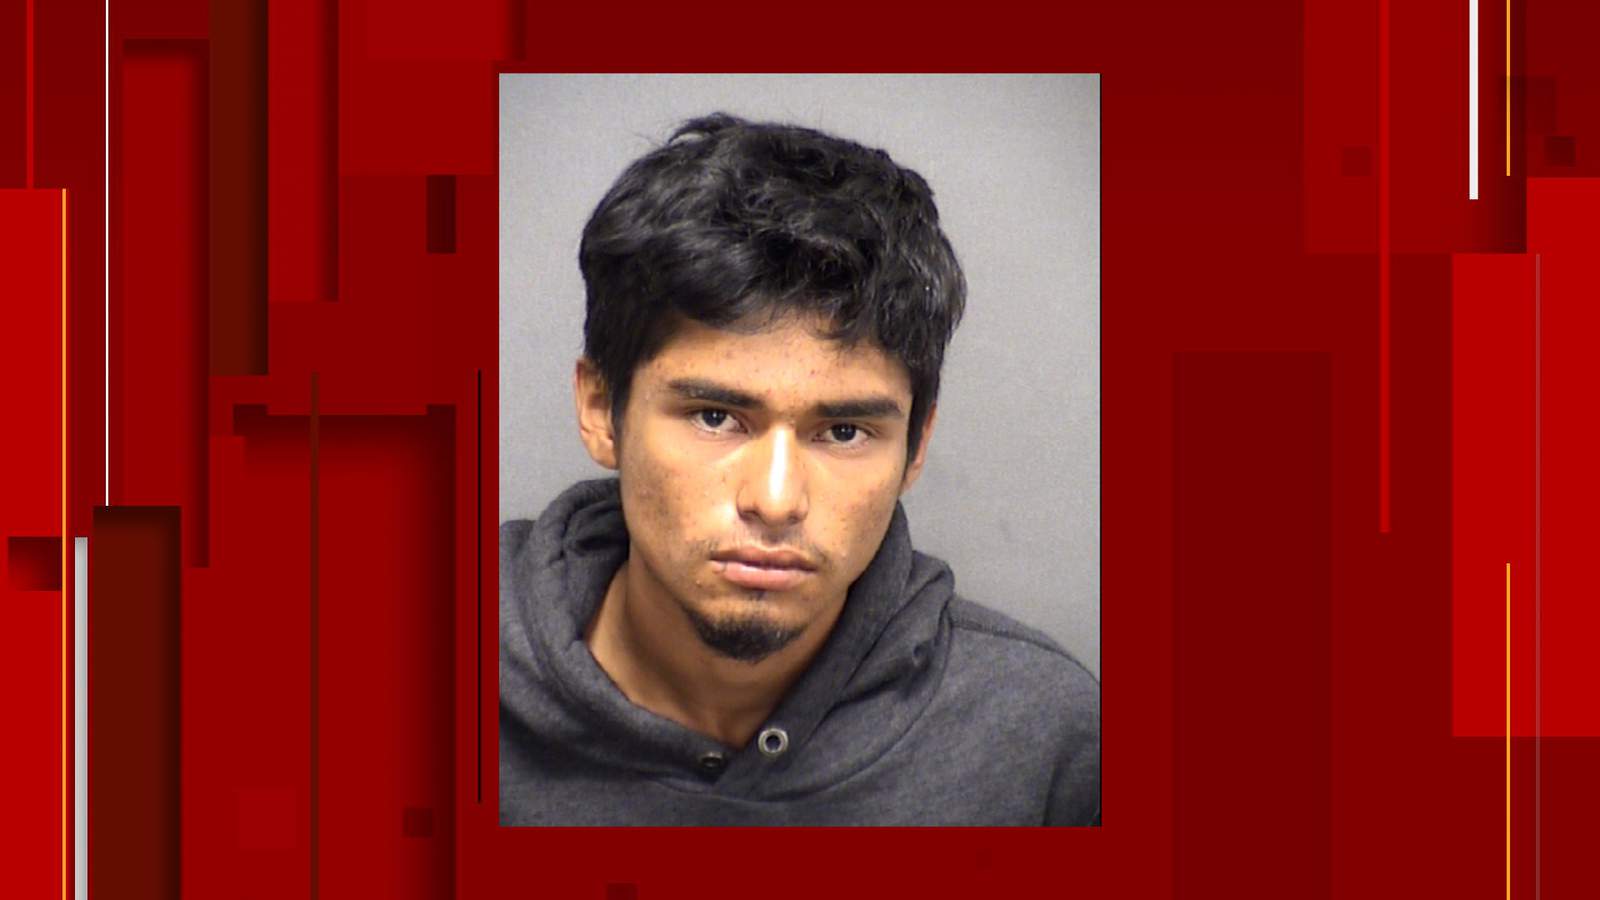 Man, 19, arrested in connection with stabbing death on West Side, San Antonio police say